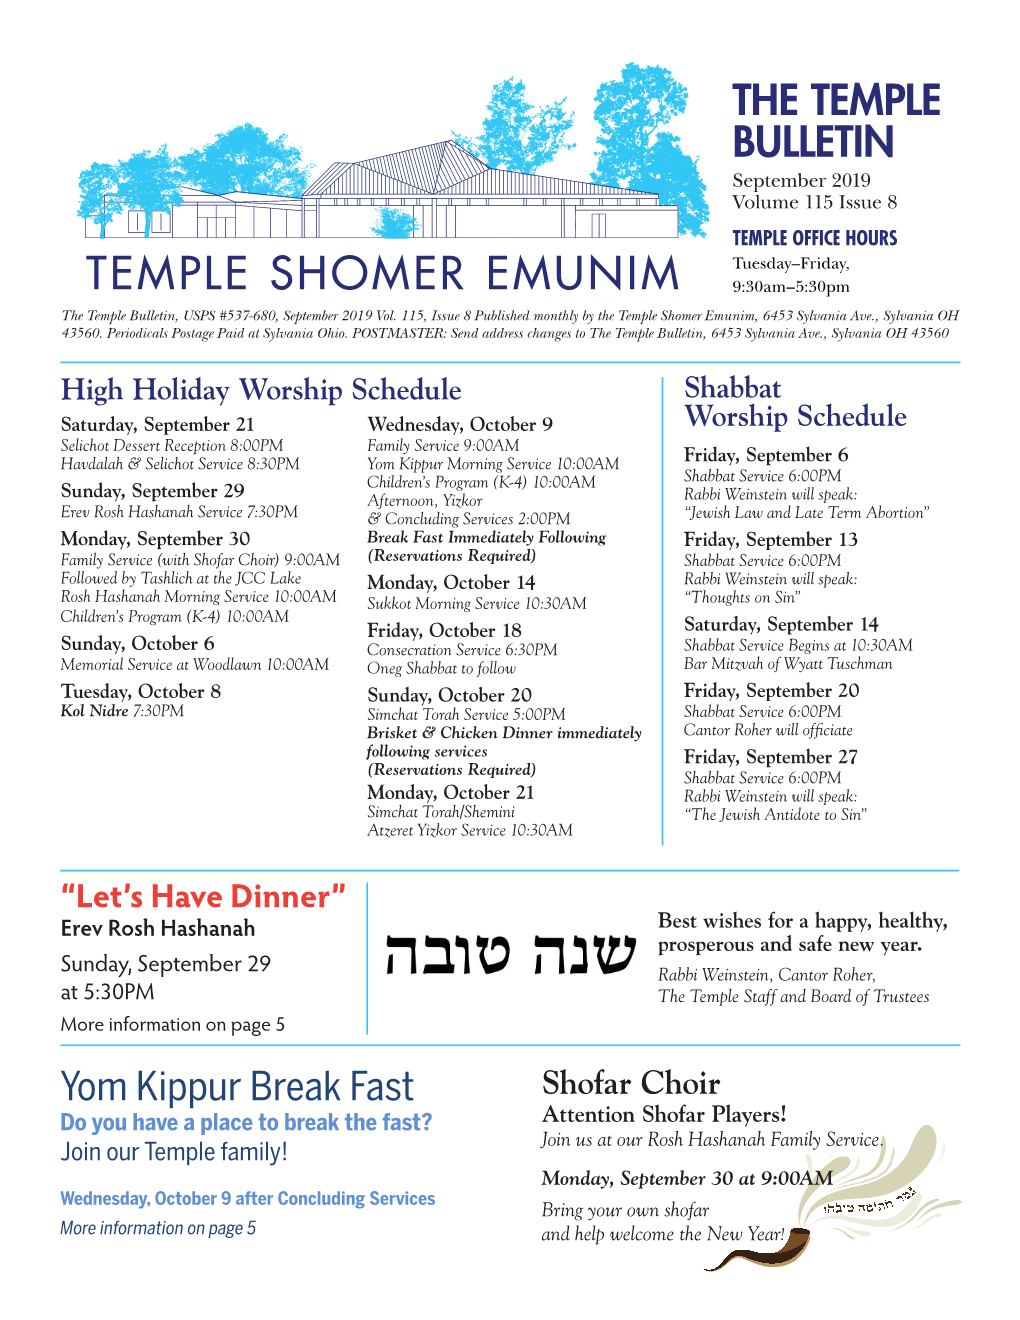 THE TEMPLE BULLETIN September 2019 Volume 115 Issue 8 TEMPLE OFFICE HOURS Tuesday–Friday, 9:30Am–5:30Pm the Temple Bulletin, USPS #537-680, September 2019 Vol